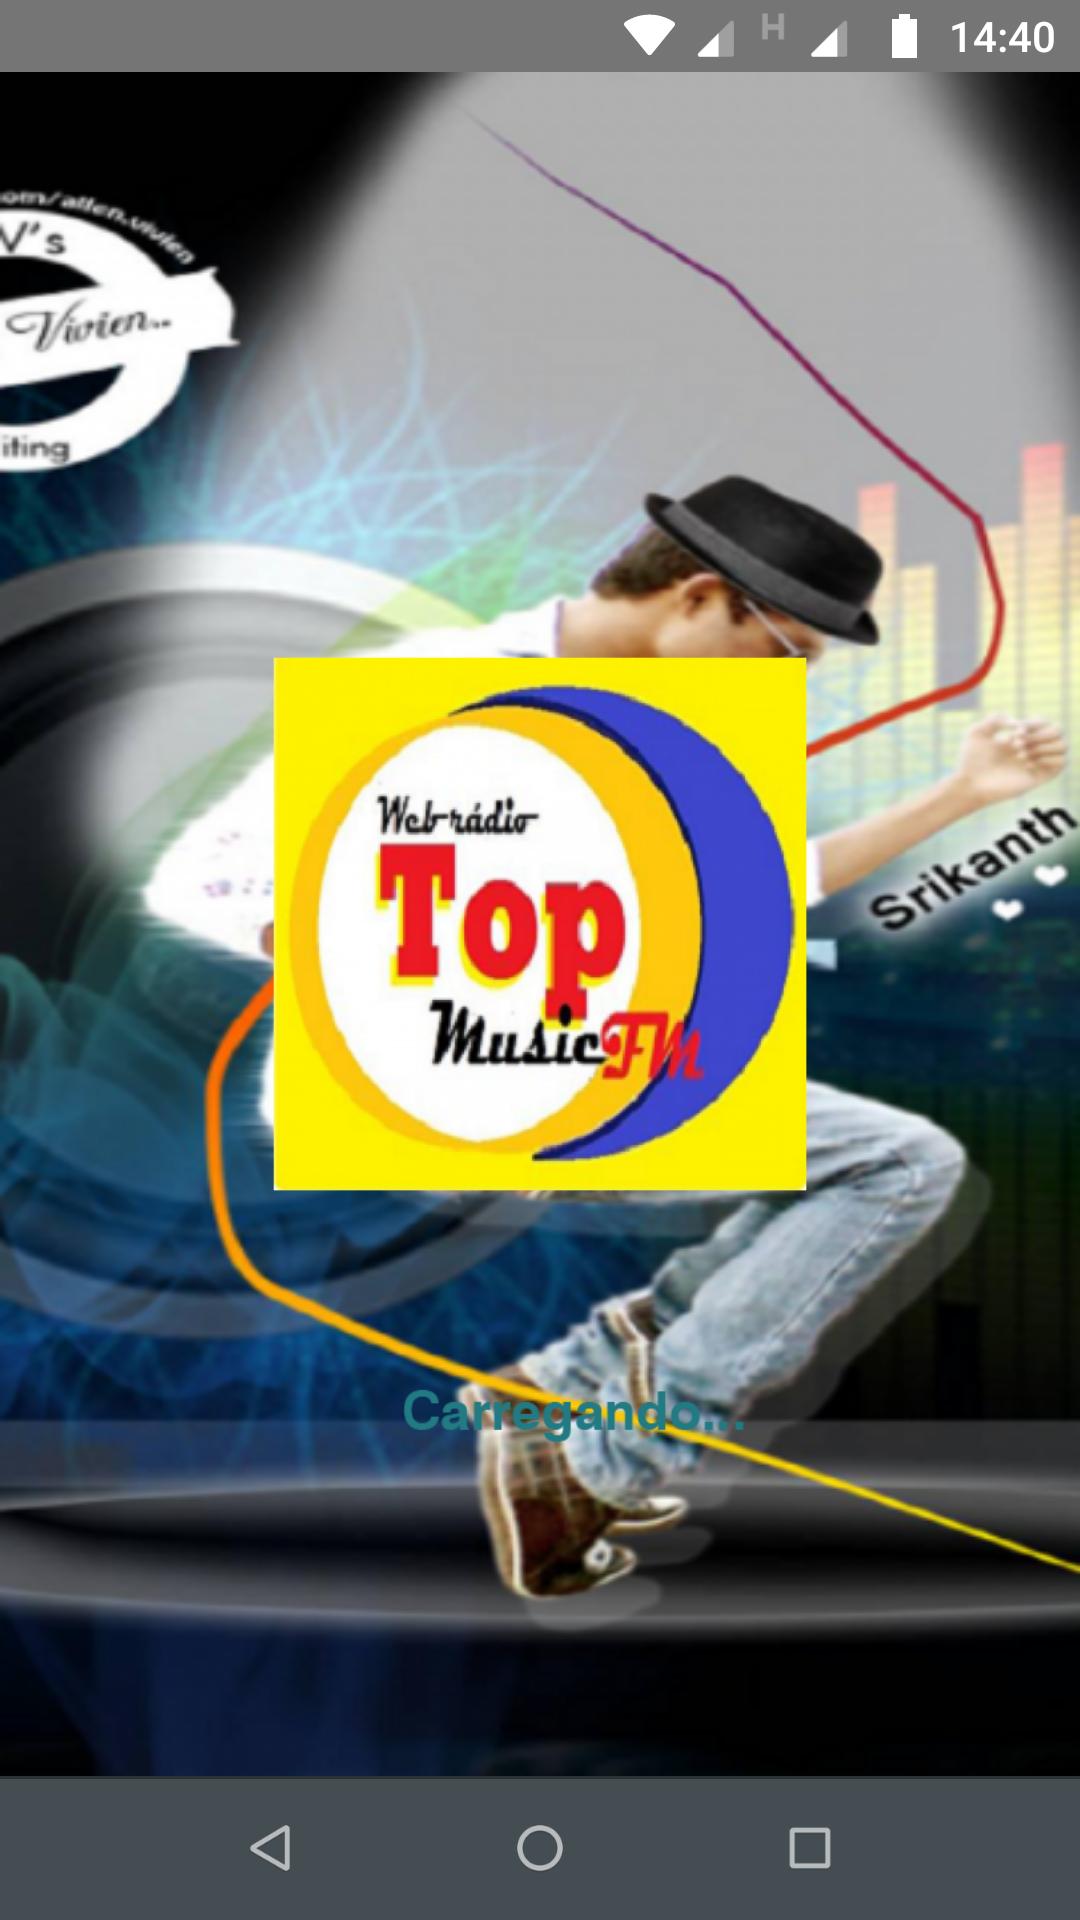 TOP MUSIC FM for Android - APK Download